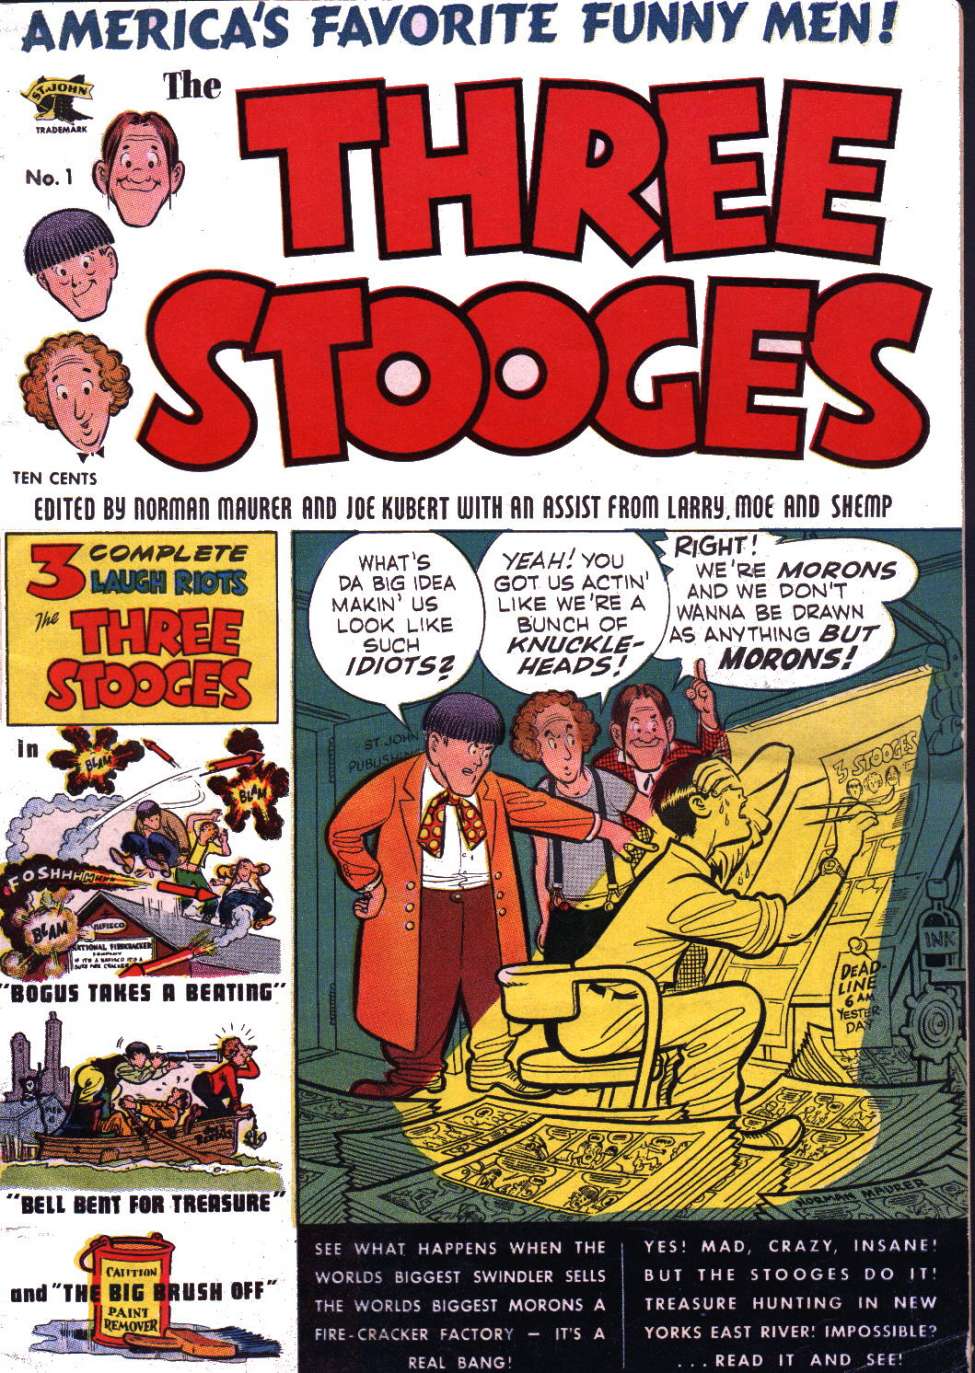 Book Cover For The Three Stooges 1